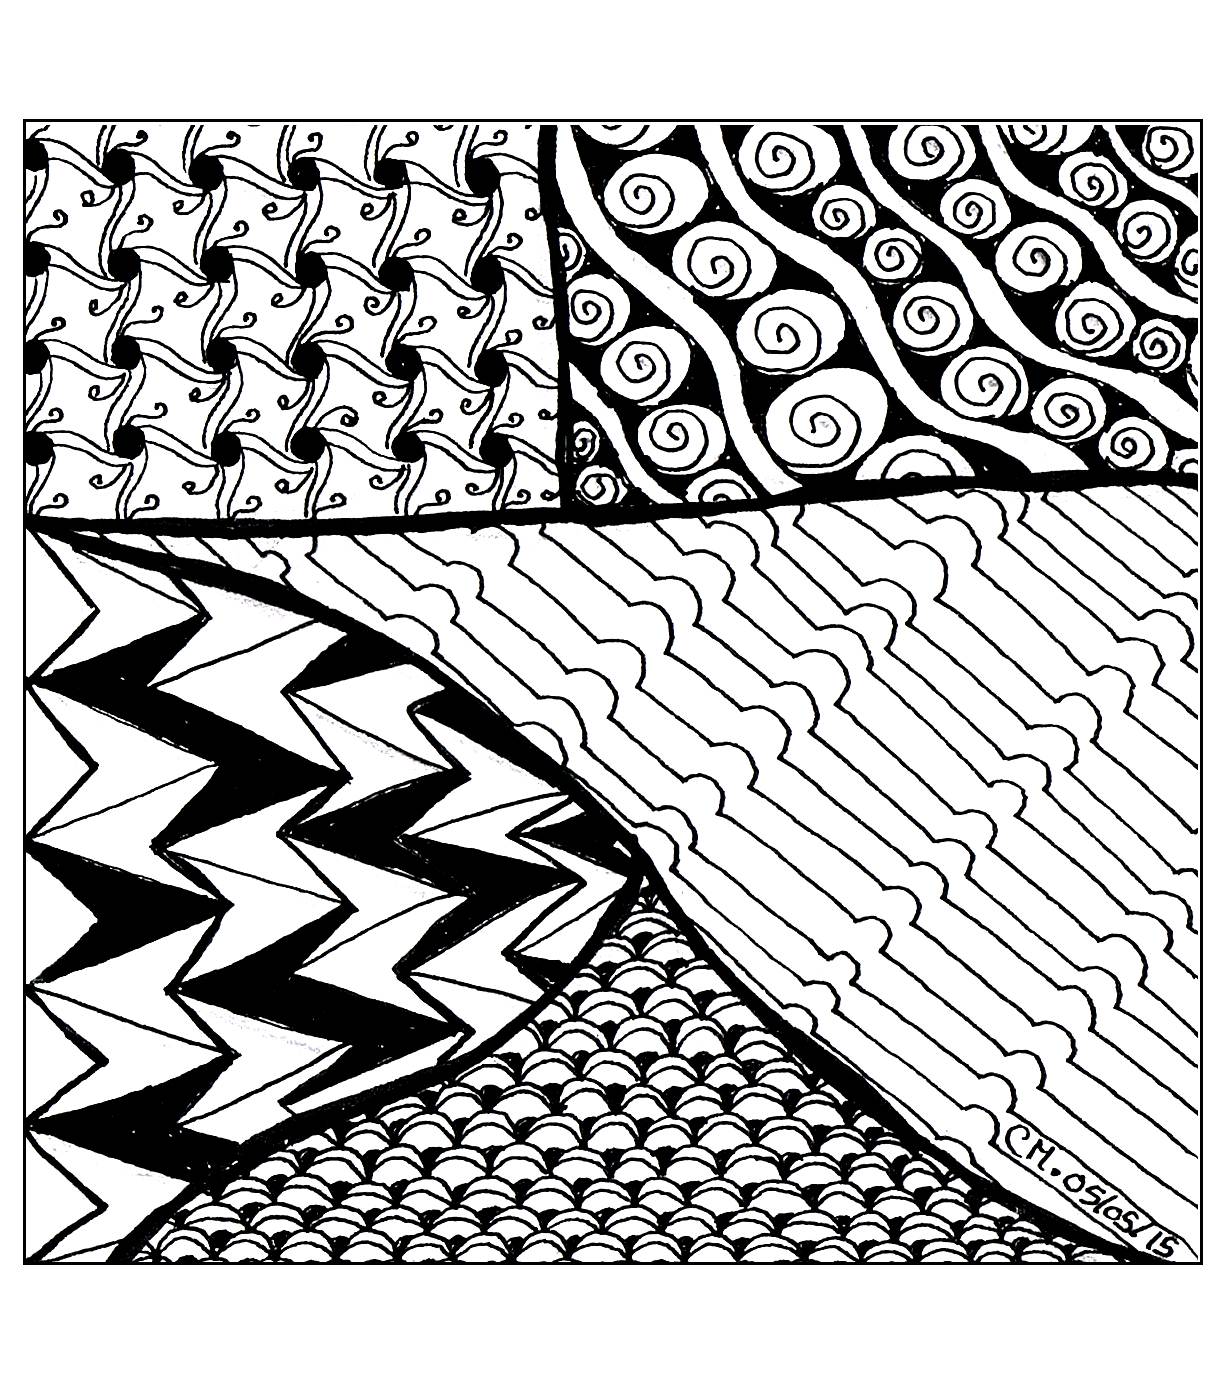 'Illusion', exclusive coloring page See the original work, Artist : Cathy M